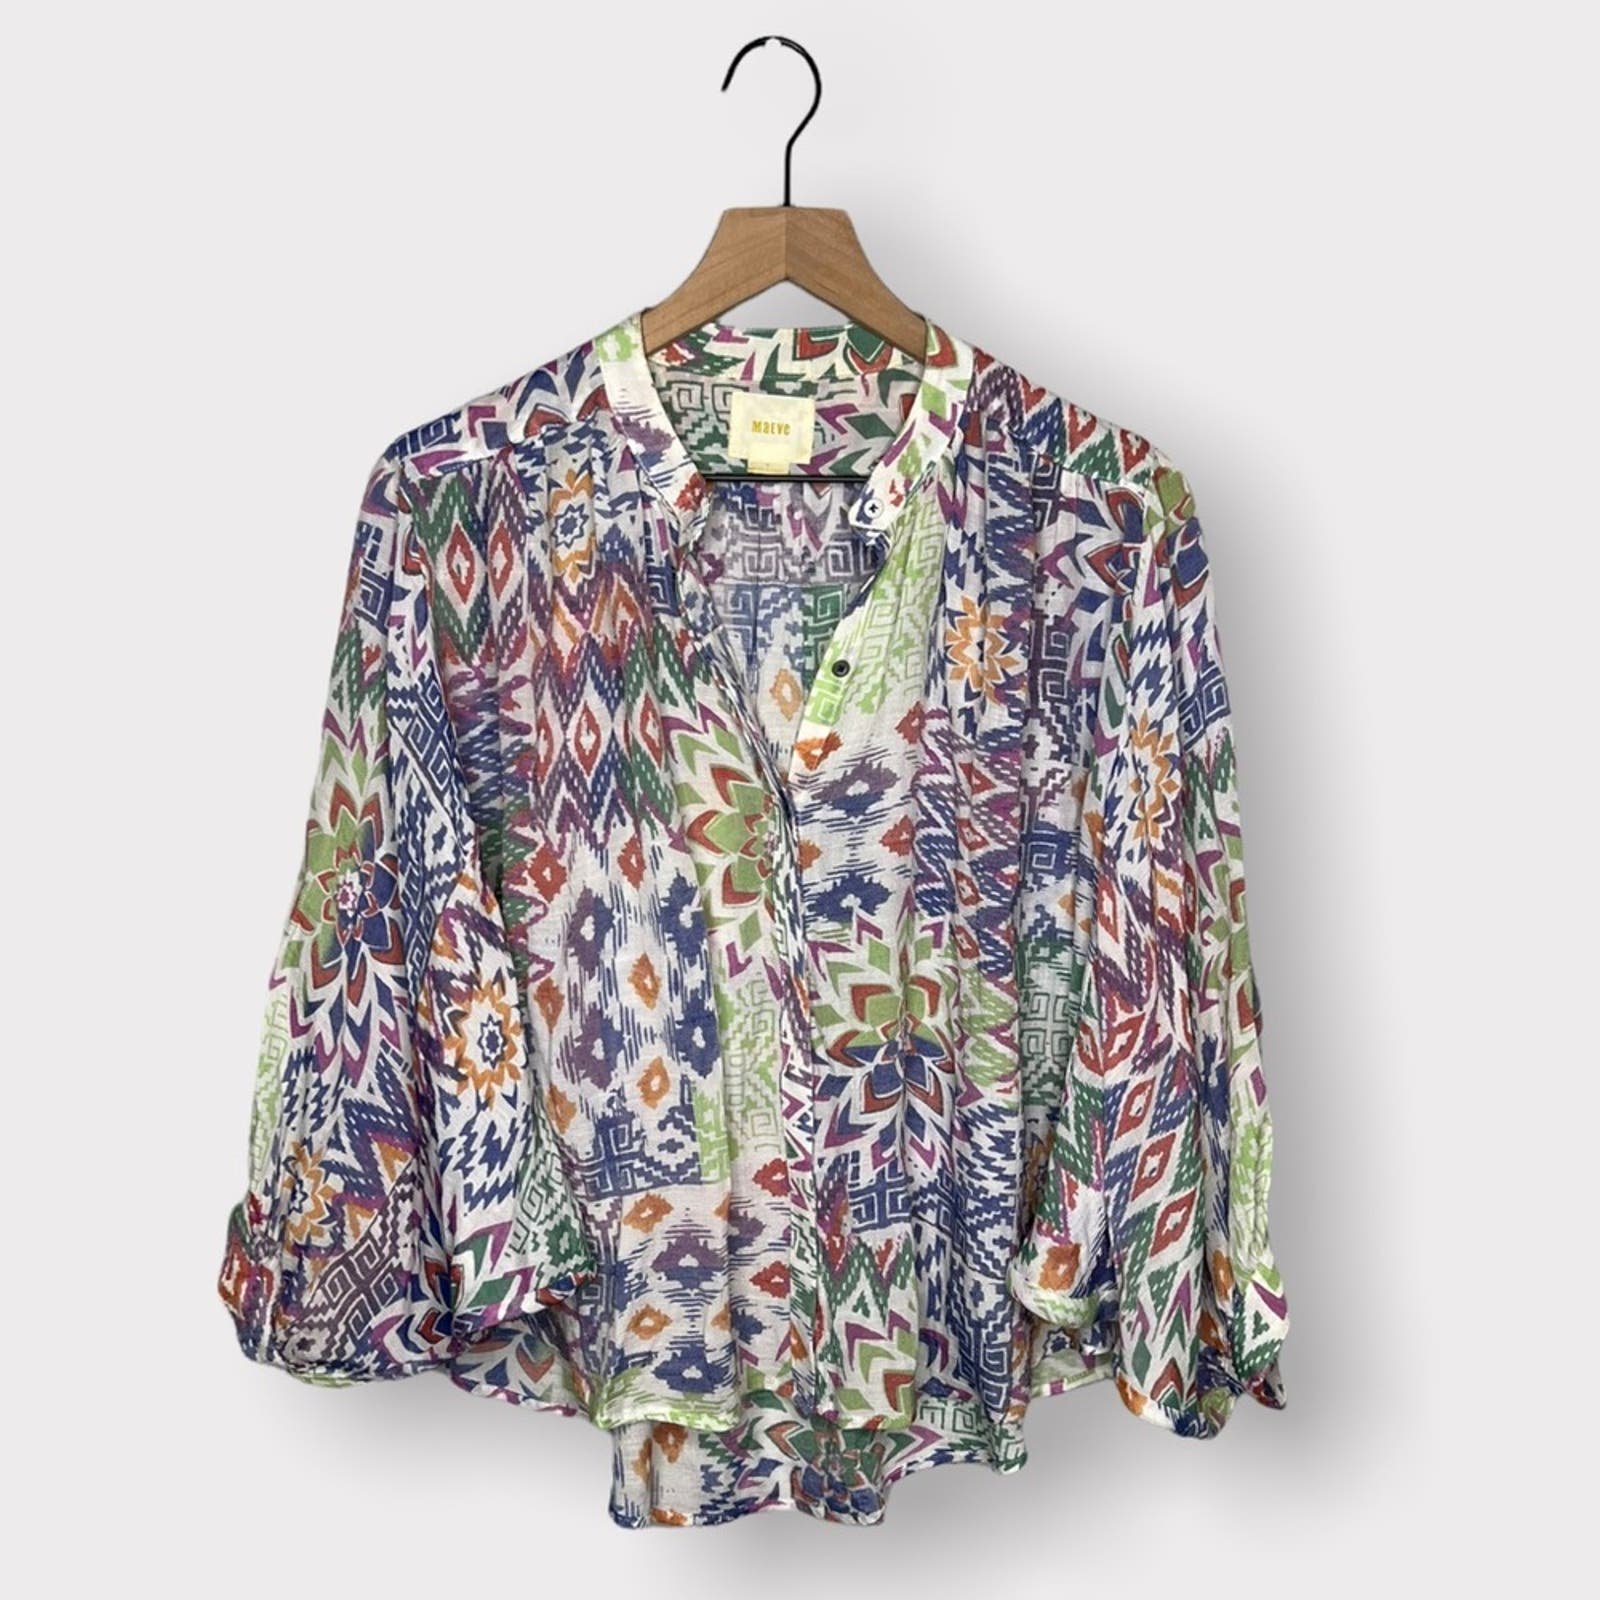 Discounted Maeve Brynna Ikat Boho Printed Dolman Sleeve Button Down Top OeYK4K1wp just for you